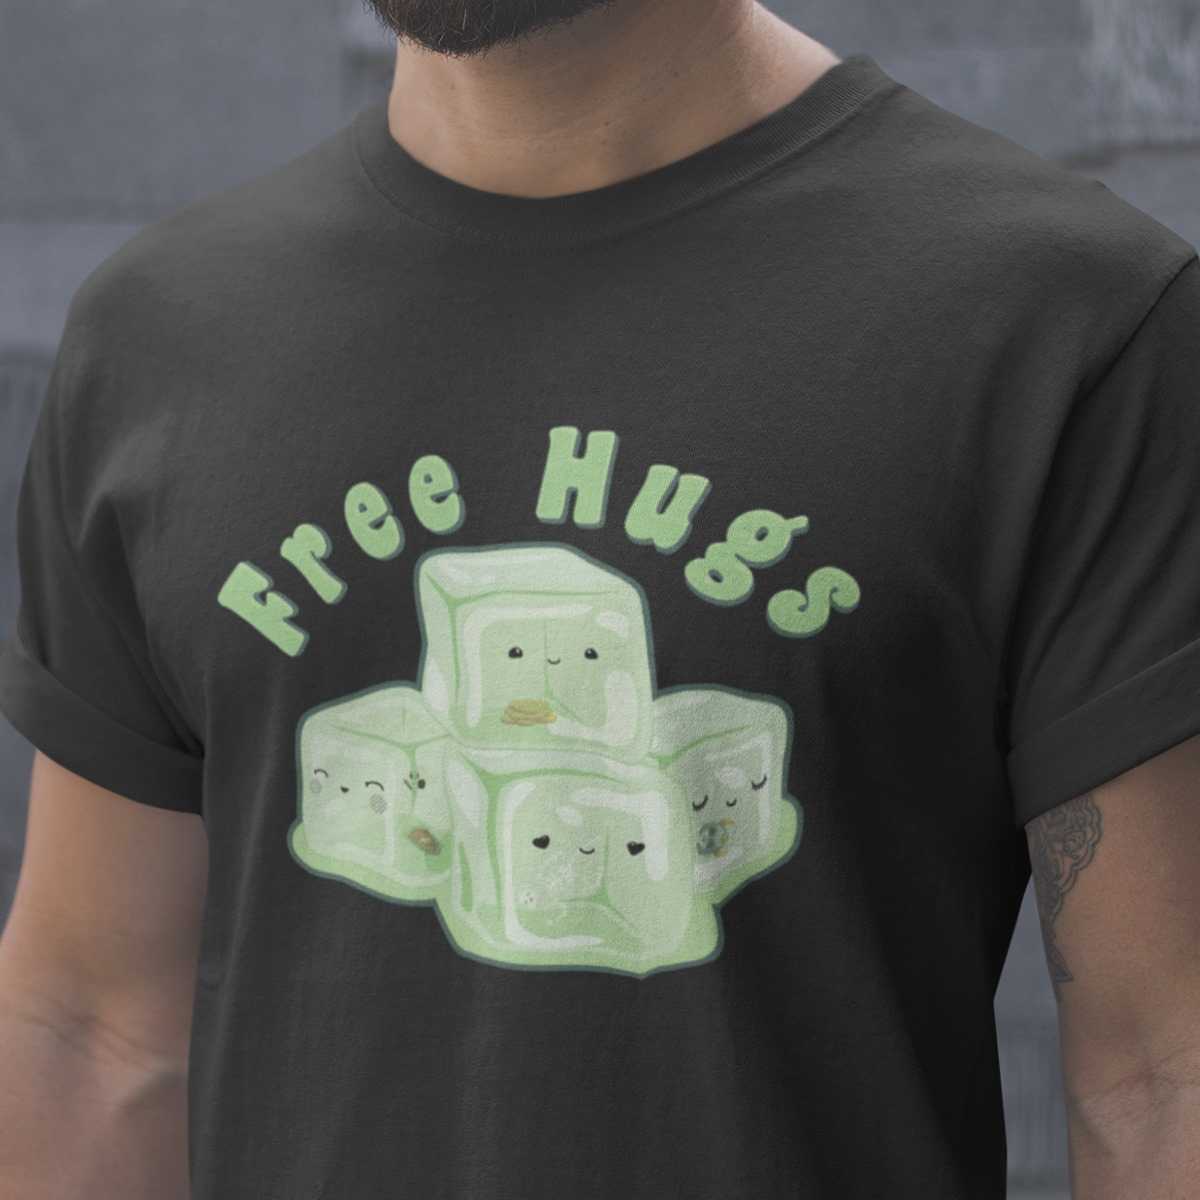 Free hugs - Gorgeous jelly, free hugs of jelly